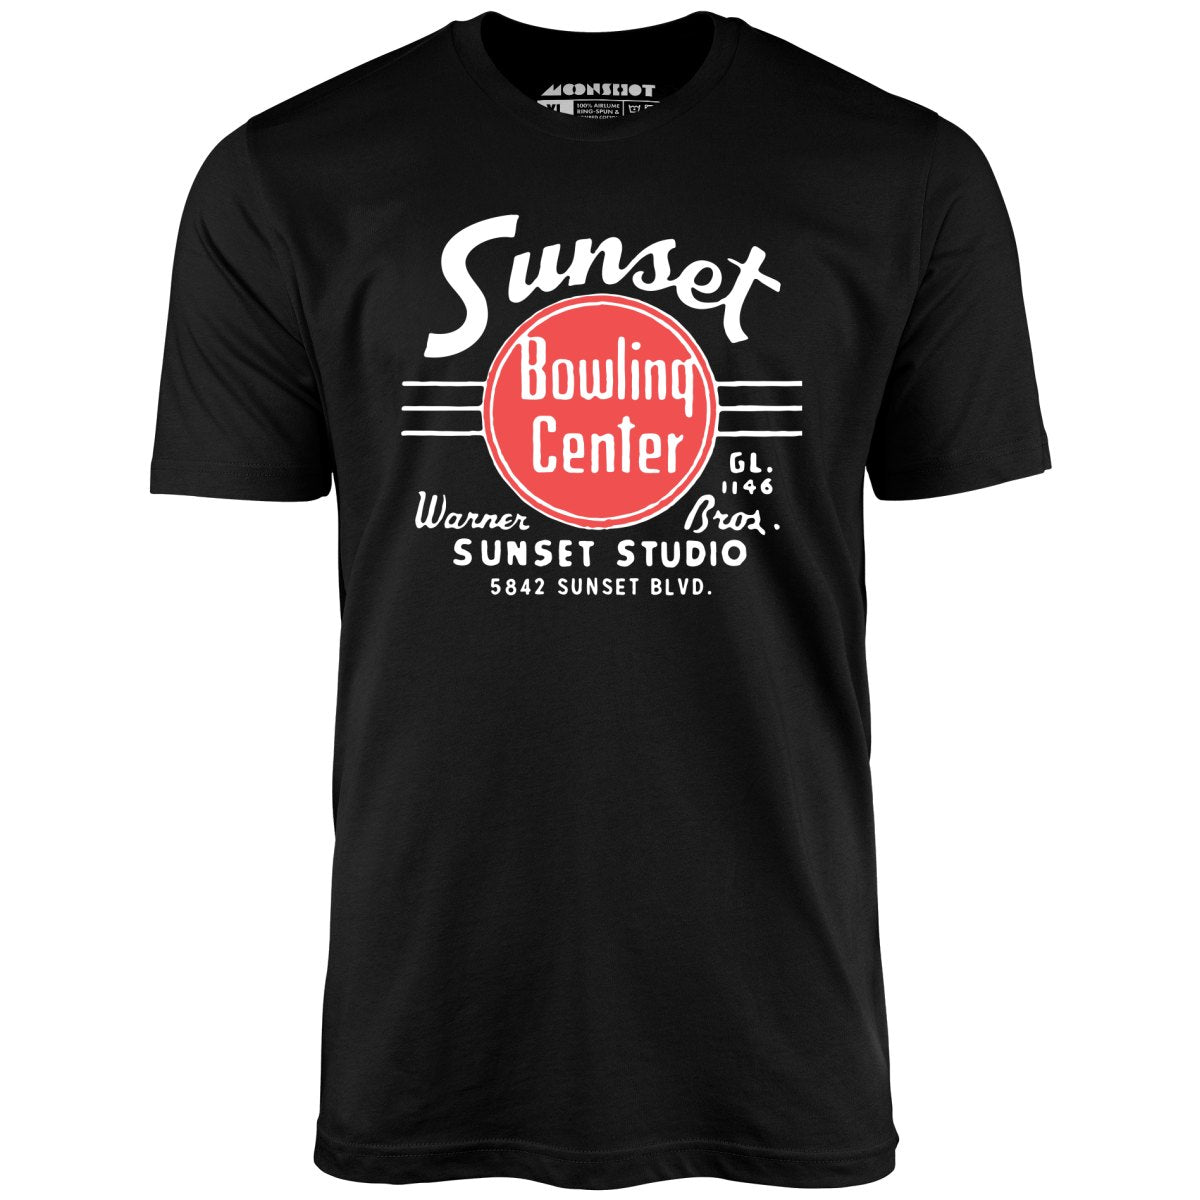 Sunset Bowling Center v2 - Hollywood, CA - Vintage Bowling Alley - Unisex T-Shirt